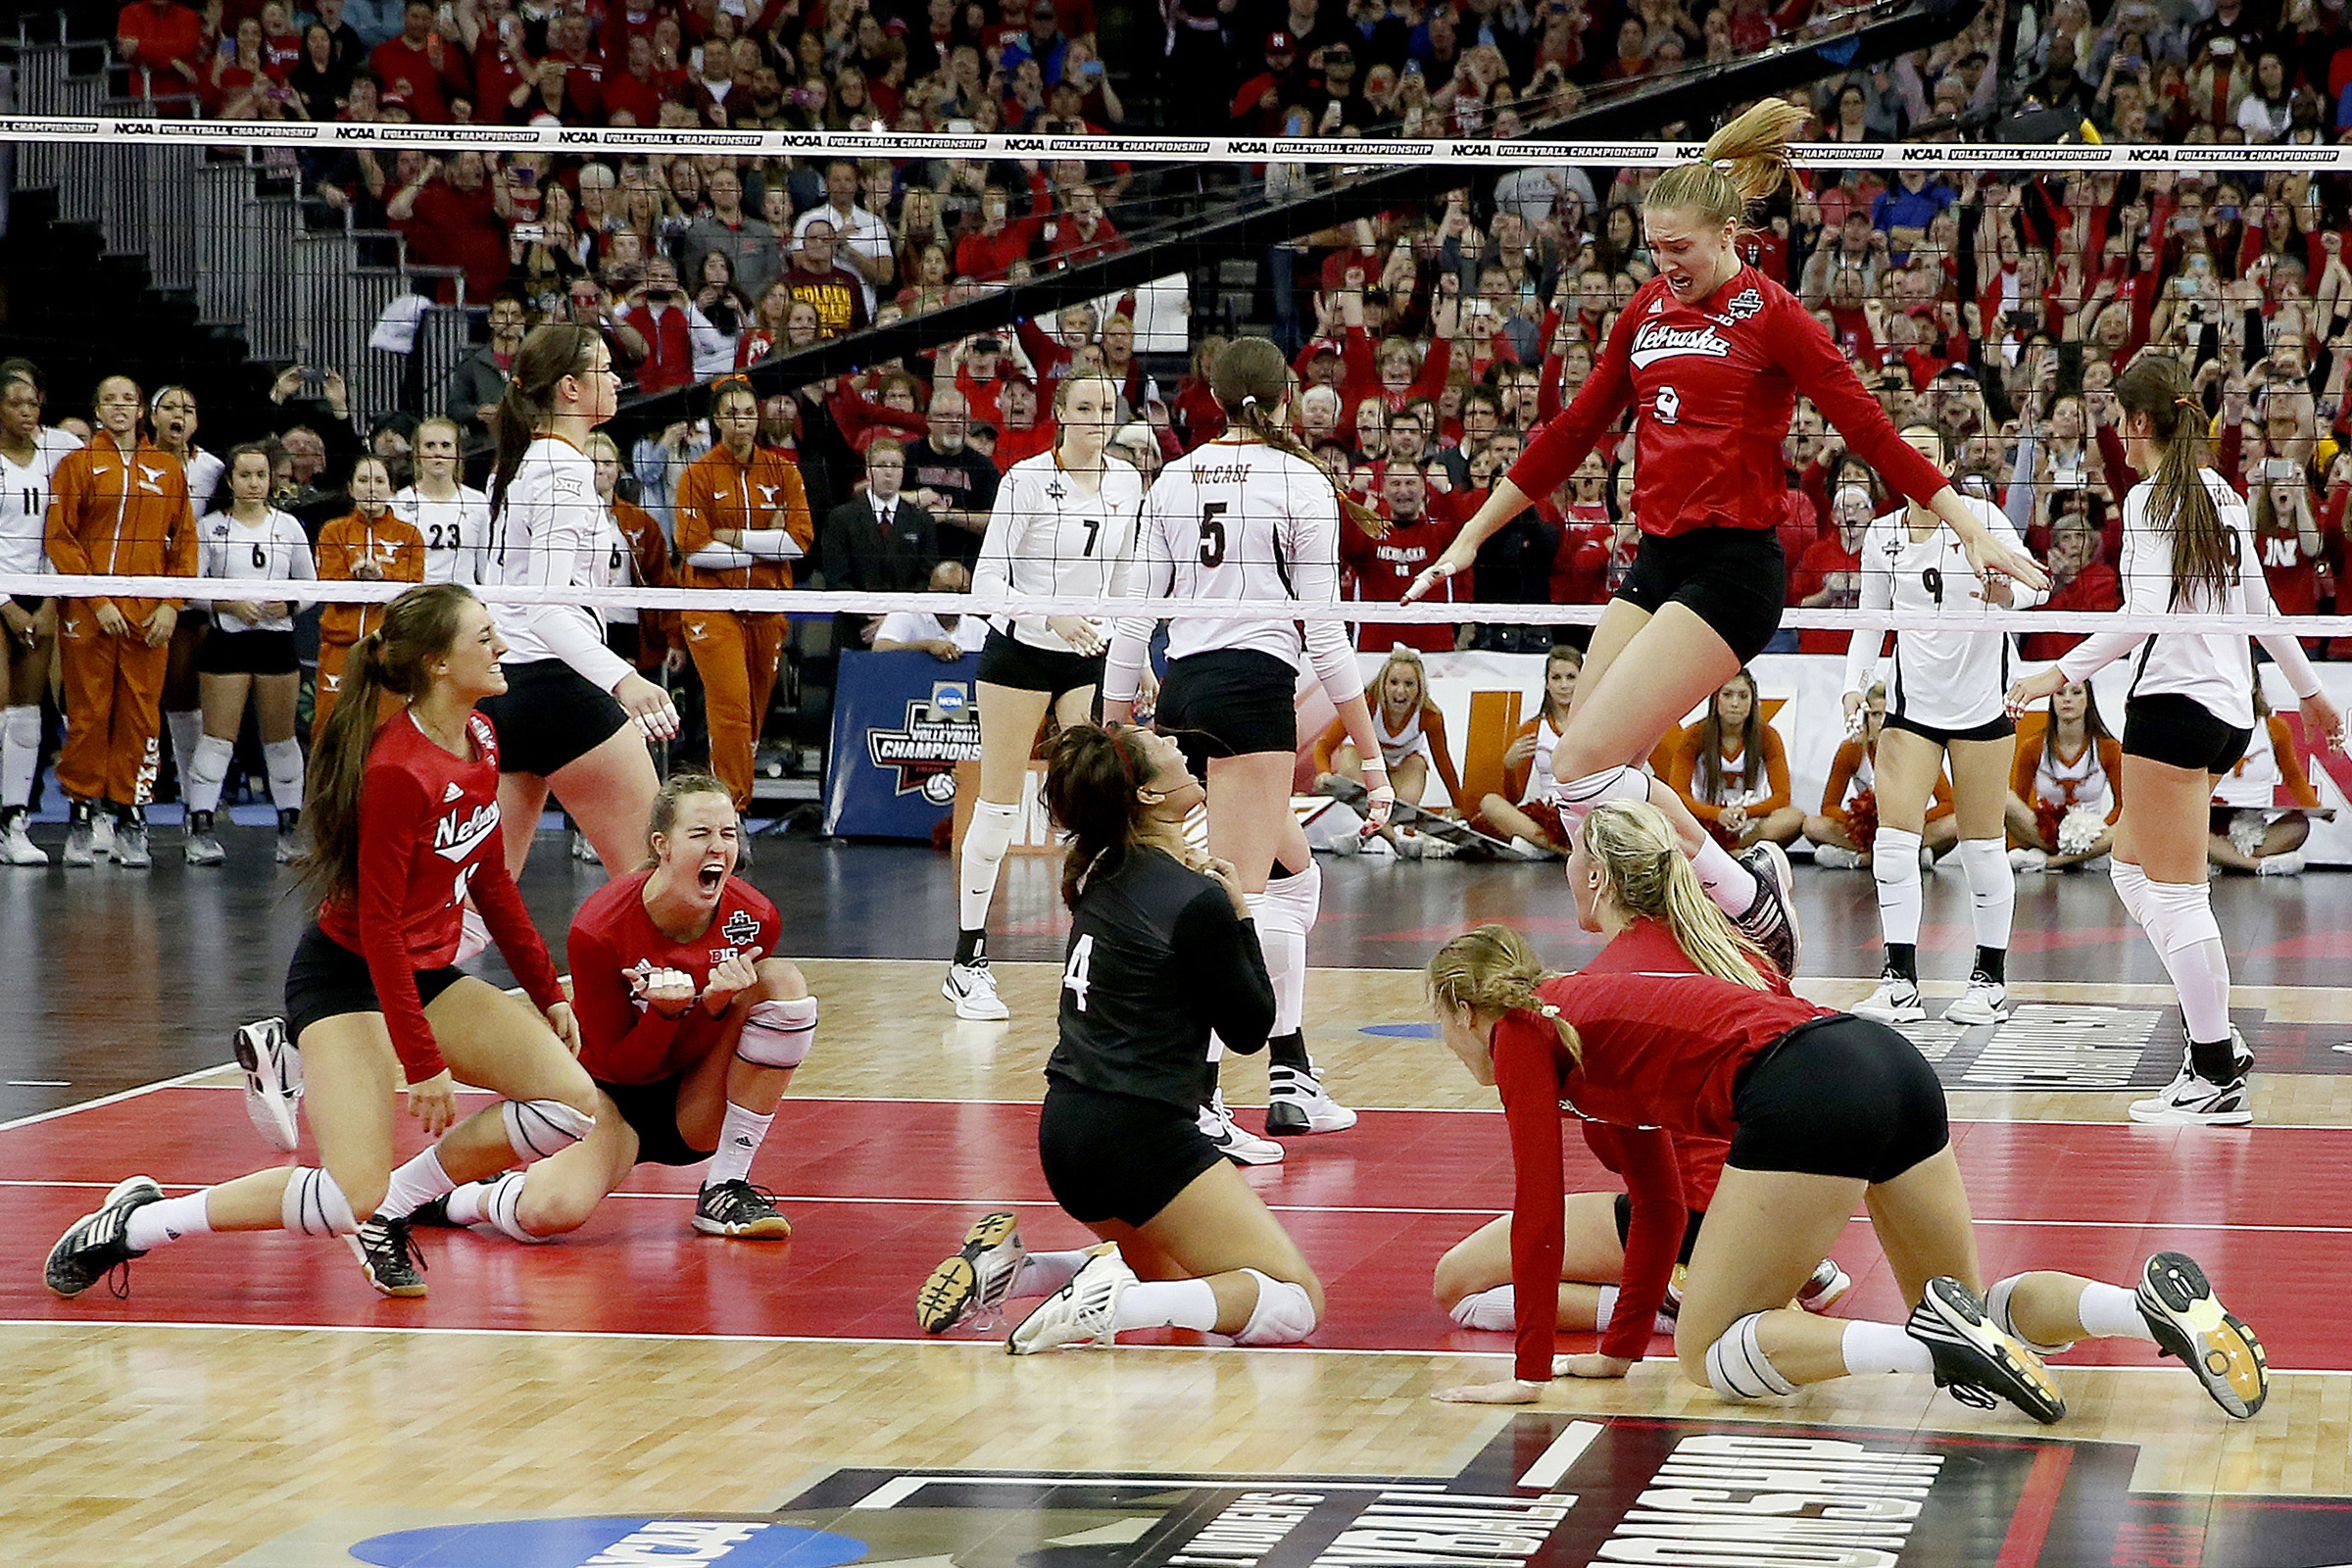 If you see it: Husker volleyball gave state new role models | Nebraska ...